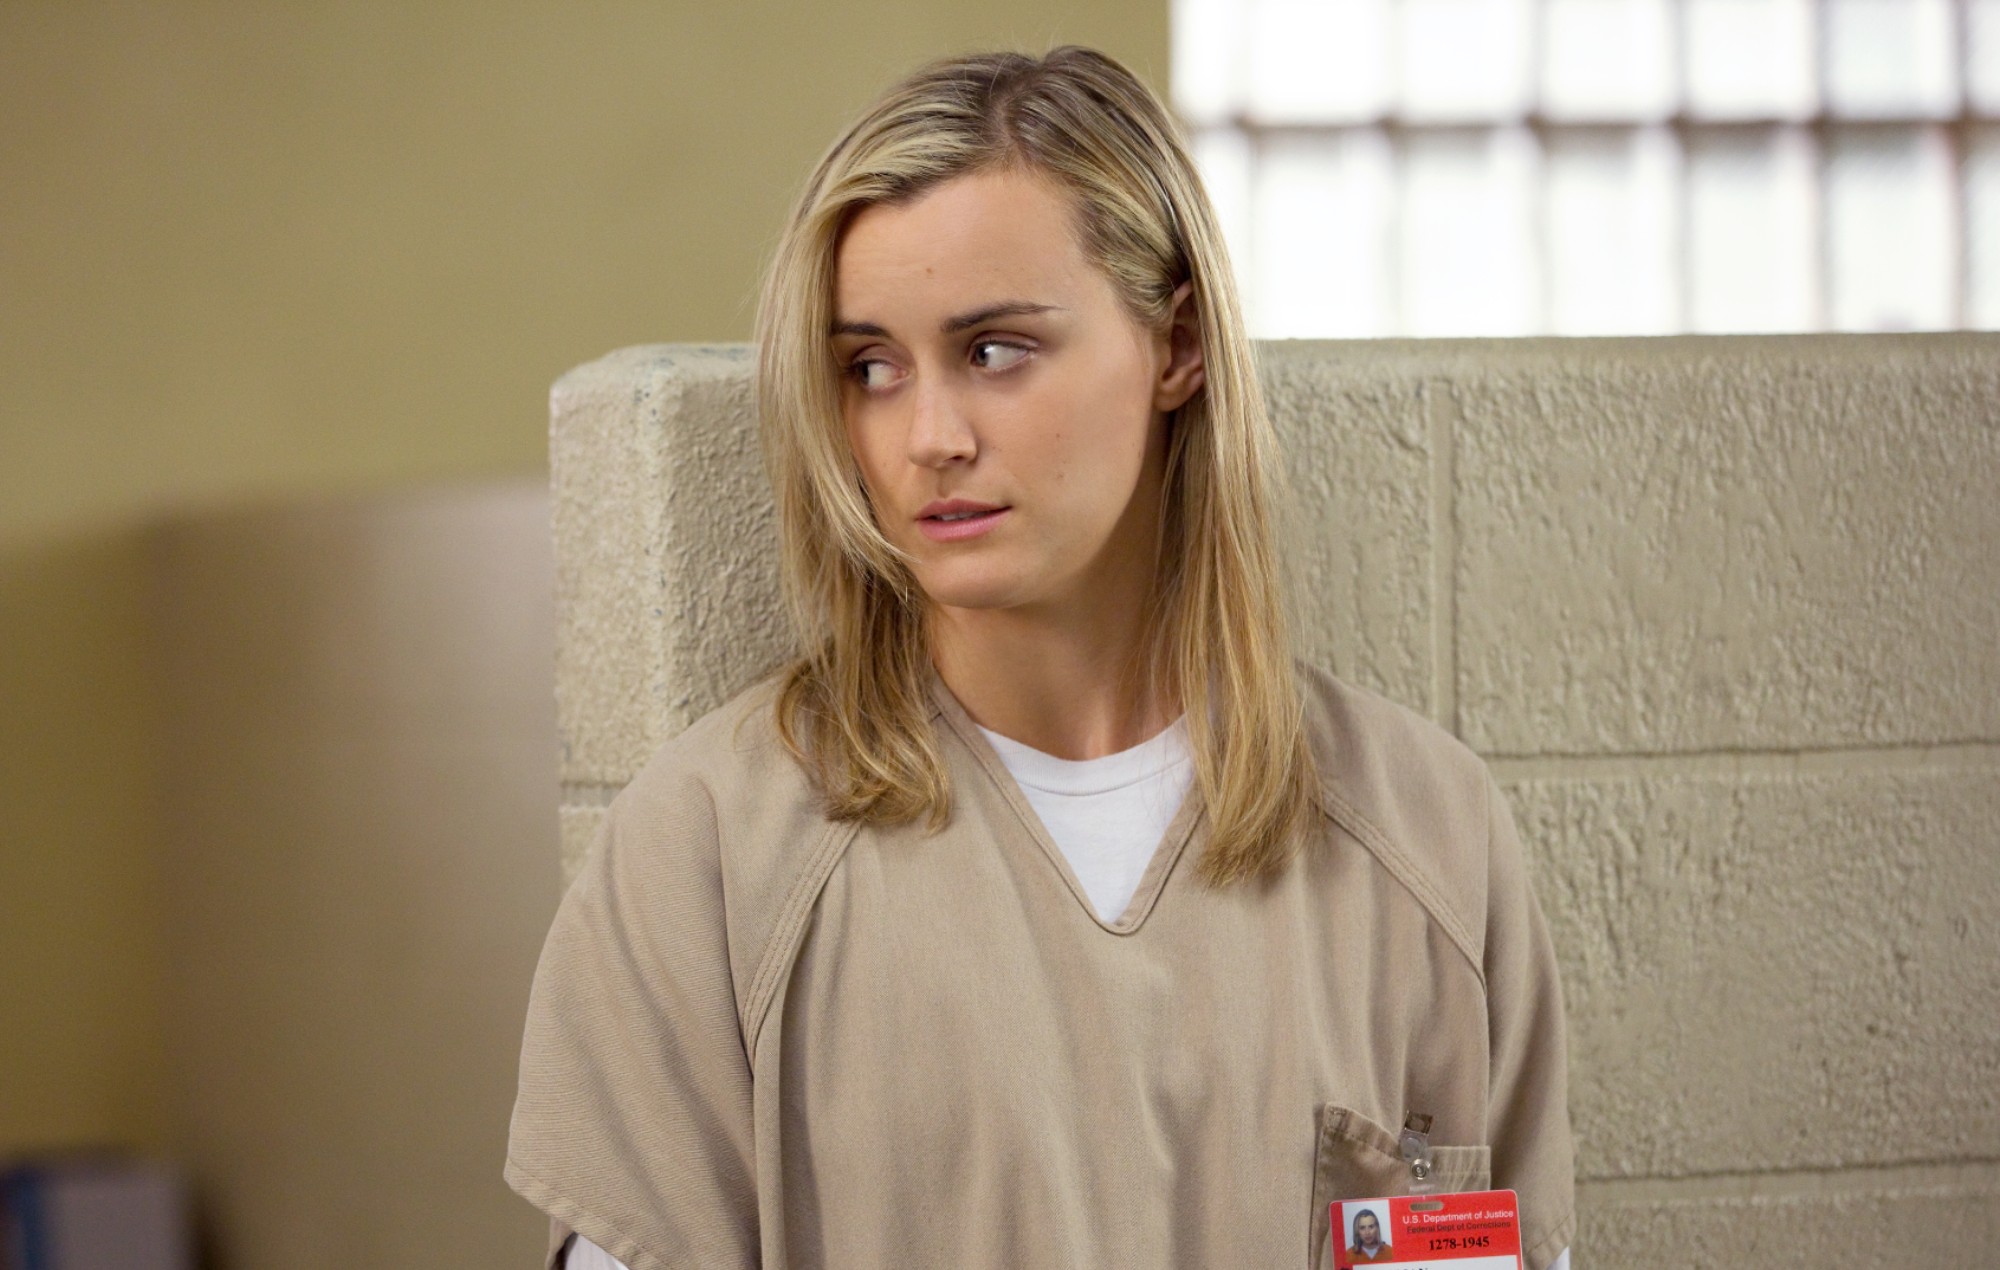 Taylor Schilling in "Orange Is the New Black"